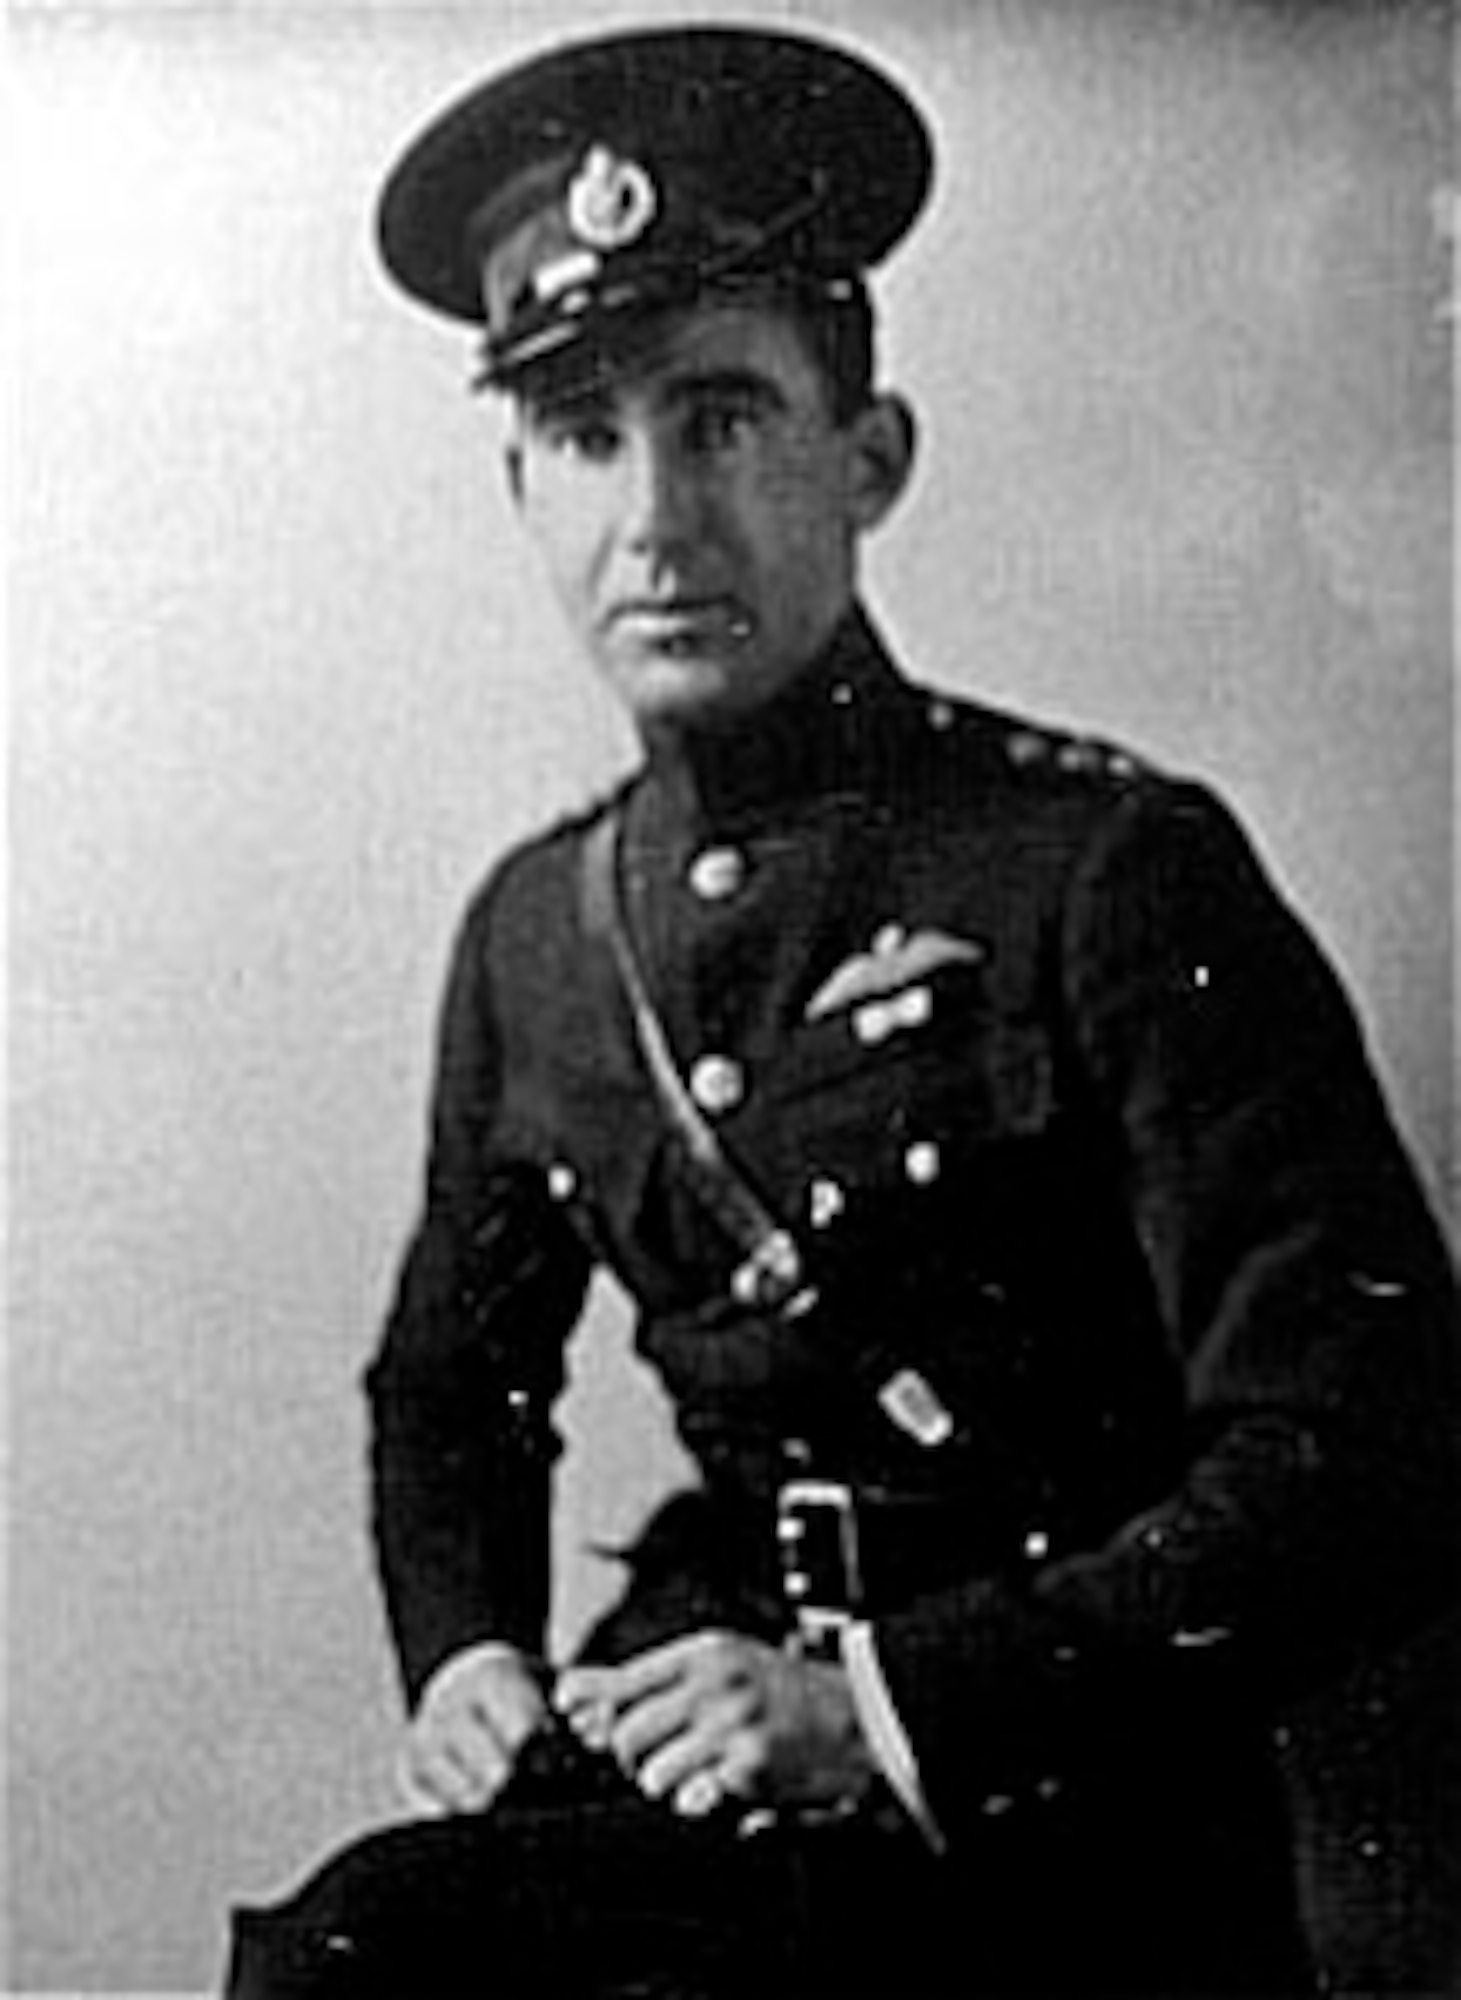 Capt. Frederick Libby in his Royal Flying Corps uniform prior to April 1, 1918, when the Royal Air Force was formed. (U.S. Air Force photo)